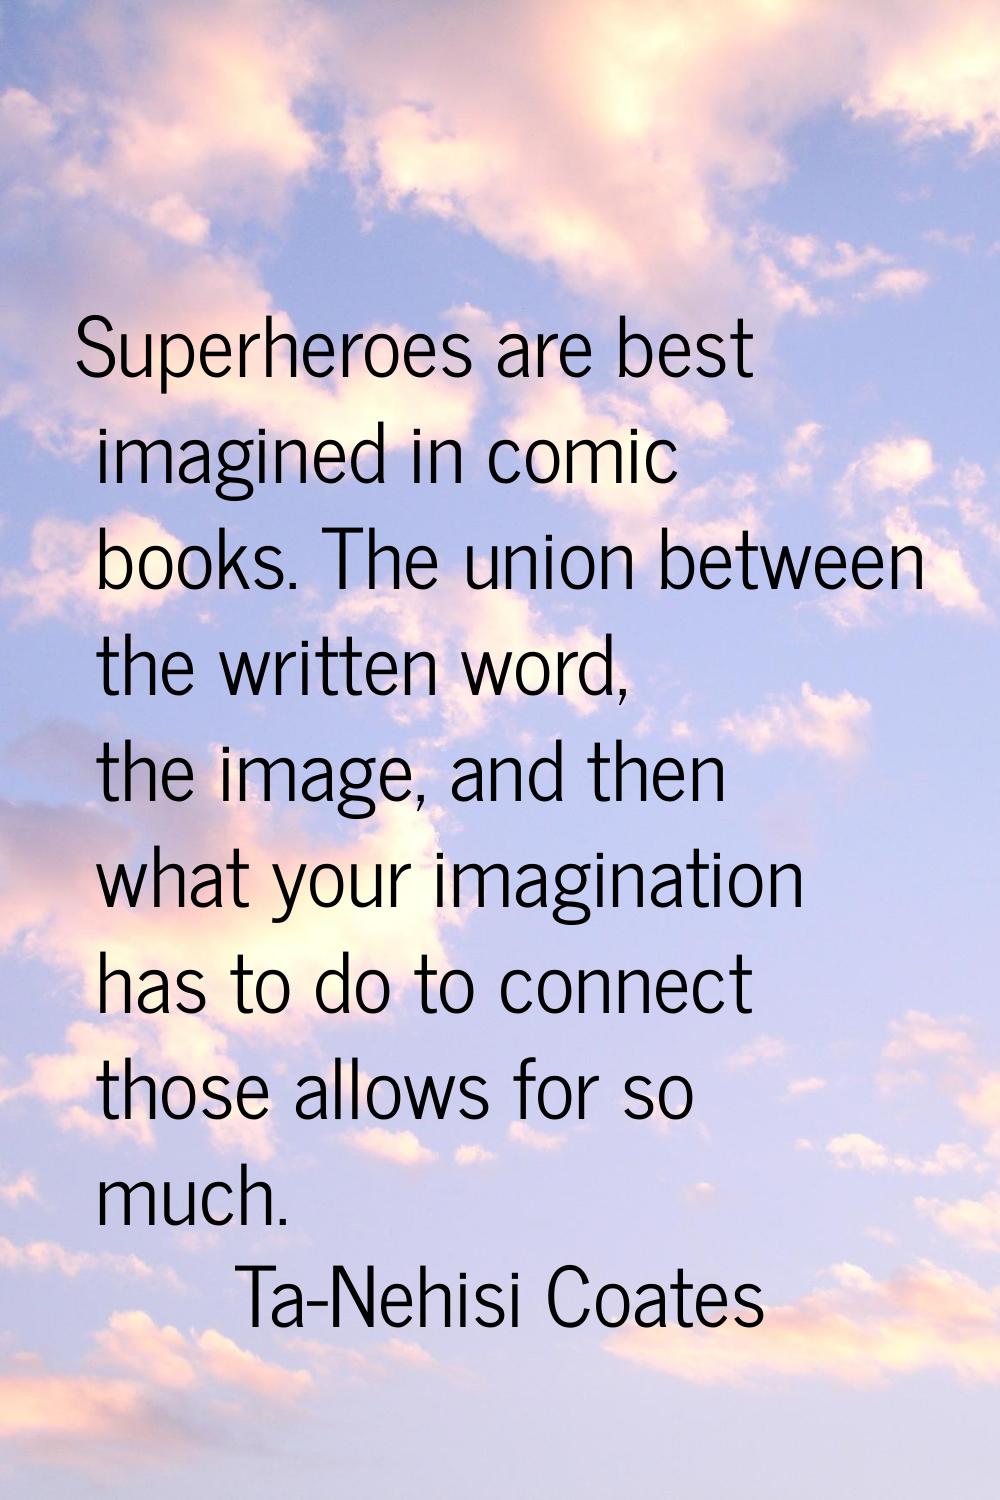 Superheroes are best imagined in comic books. The union between the written word, the image, and th